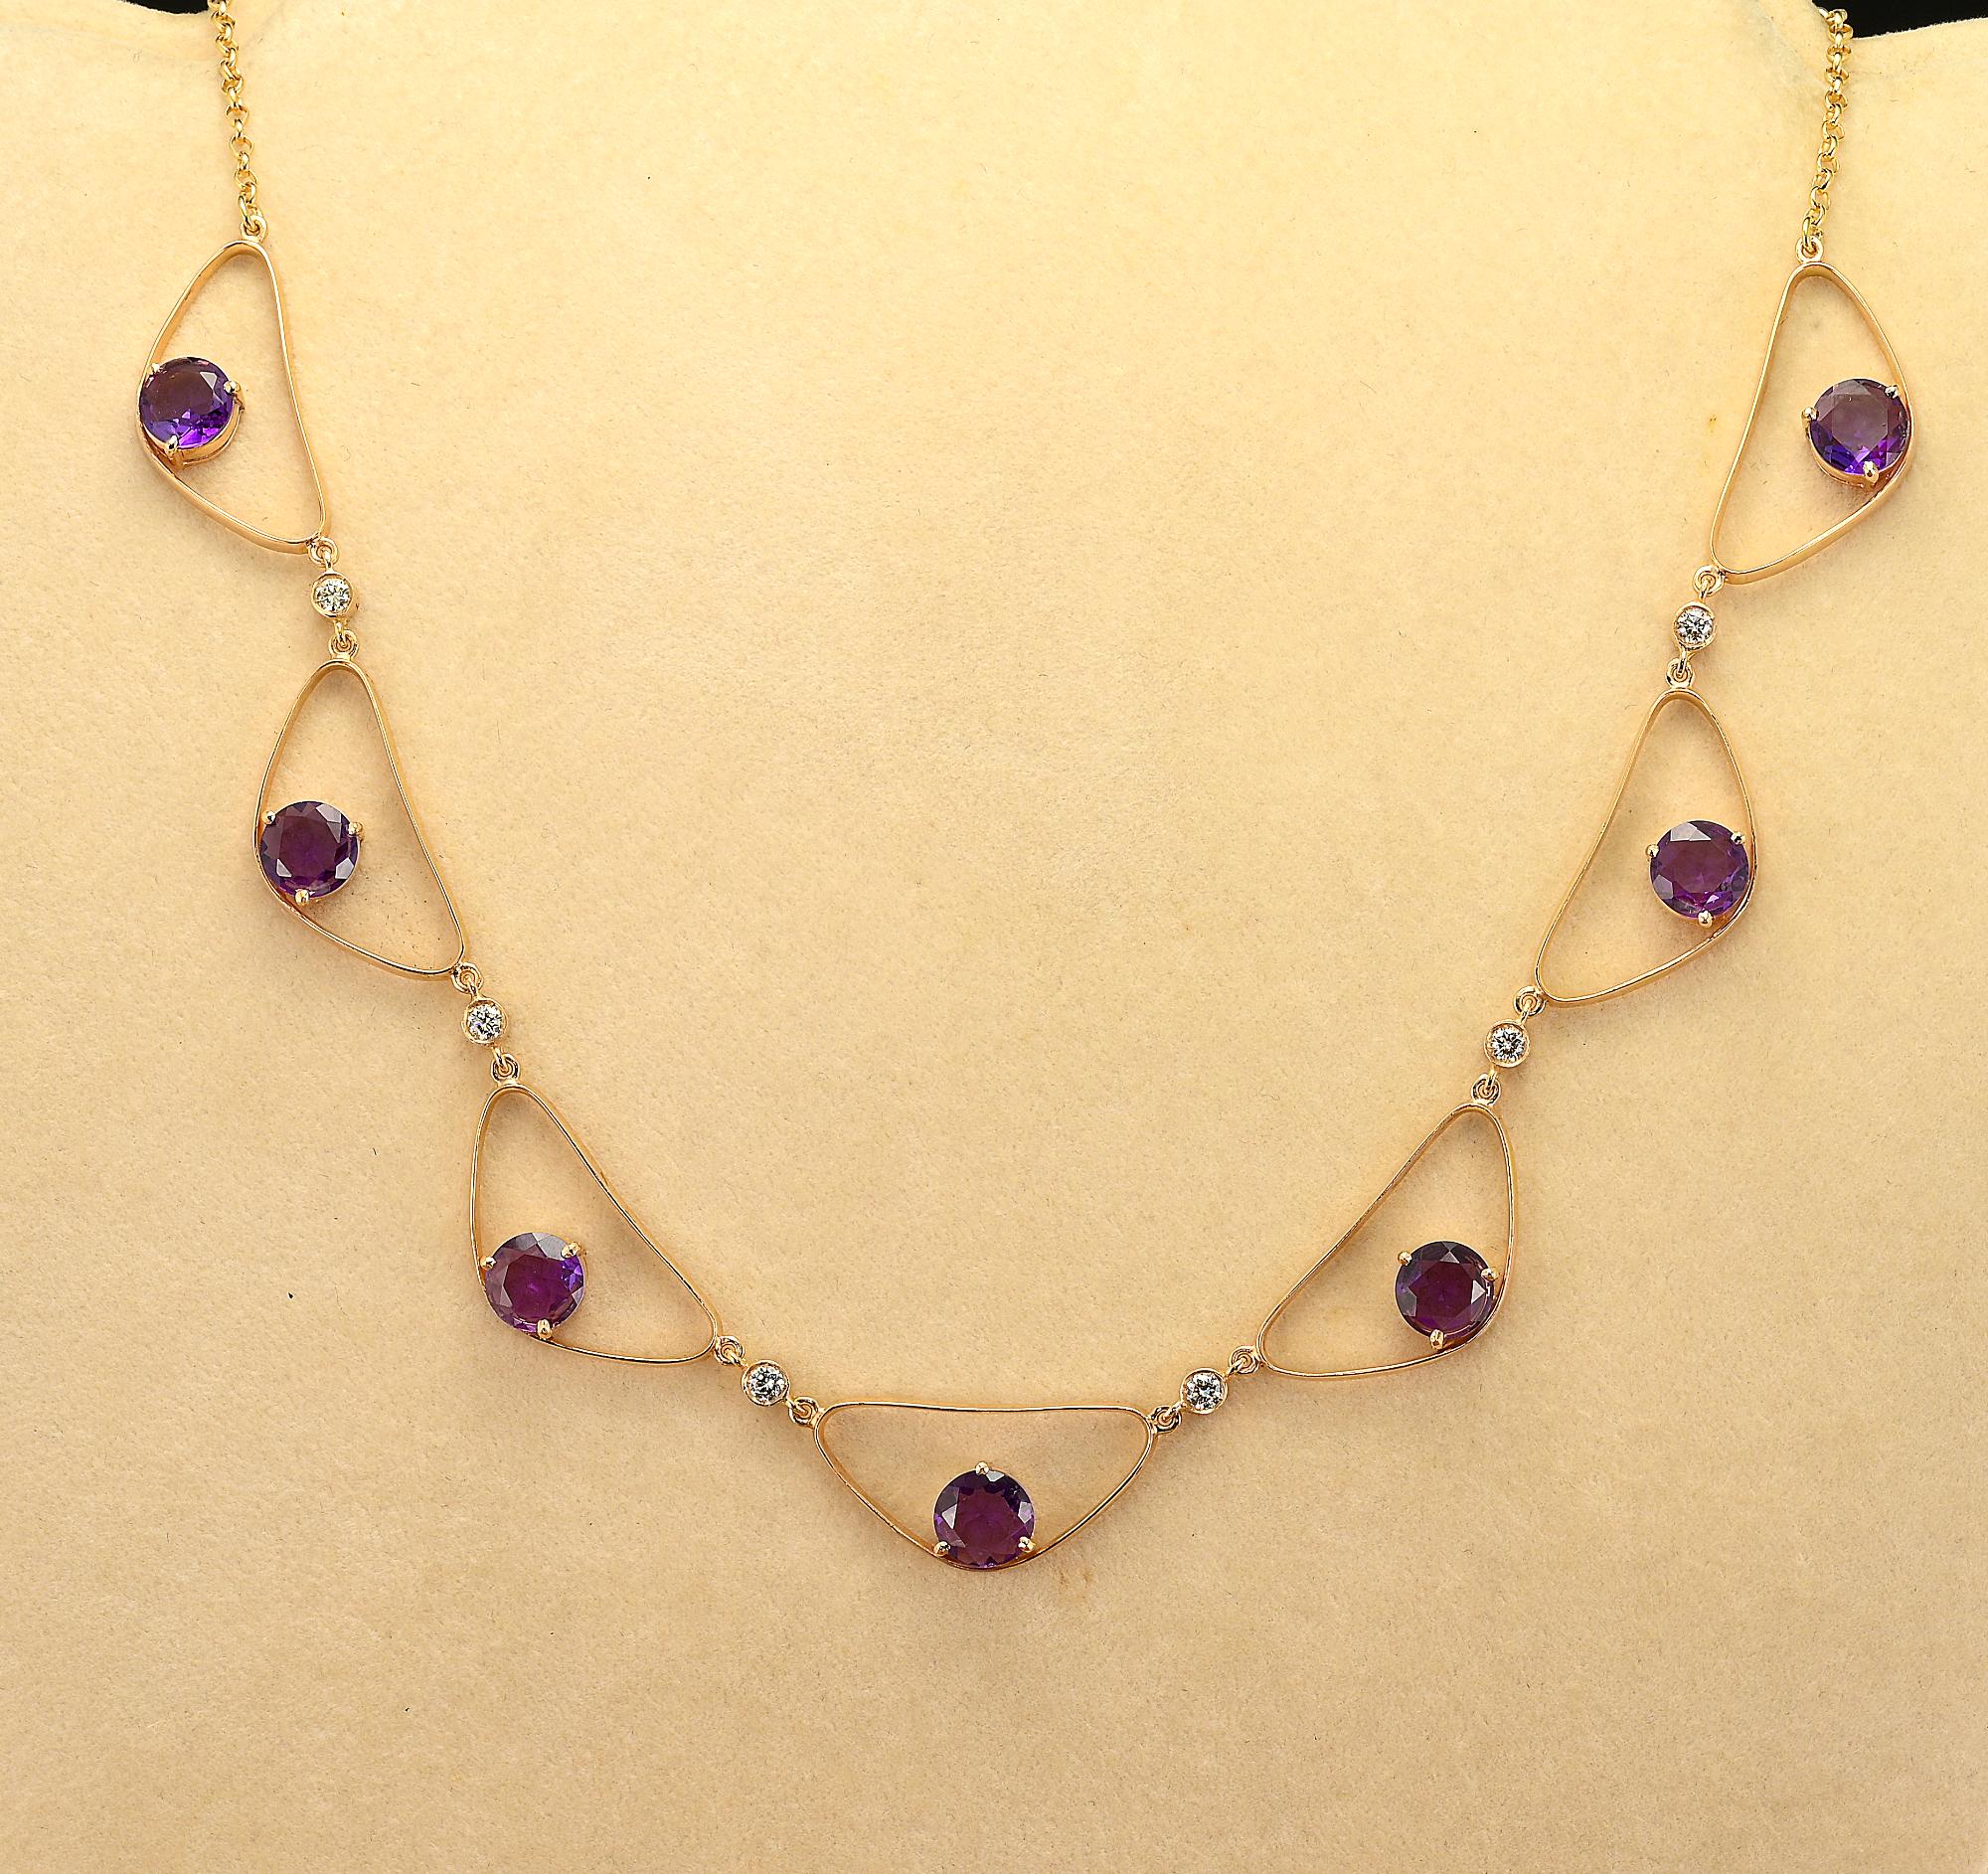 This gorgeous Retro period necklace is 1940 circa
Hand crafted of solid 18 KT gold in a lovely open work design set with round cut Amethyst and Diamond connecting each link
Approx. 8.00 Carats of fine Purple color Amethysts combined with 6 brilliant